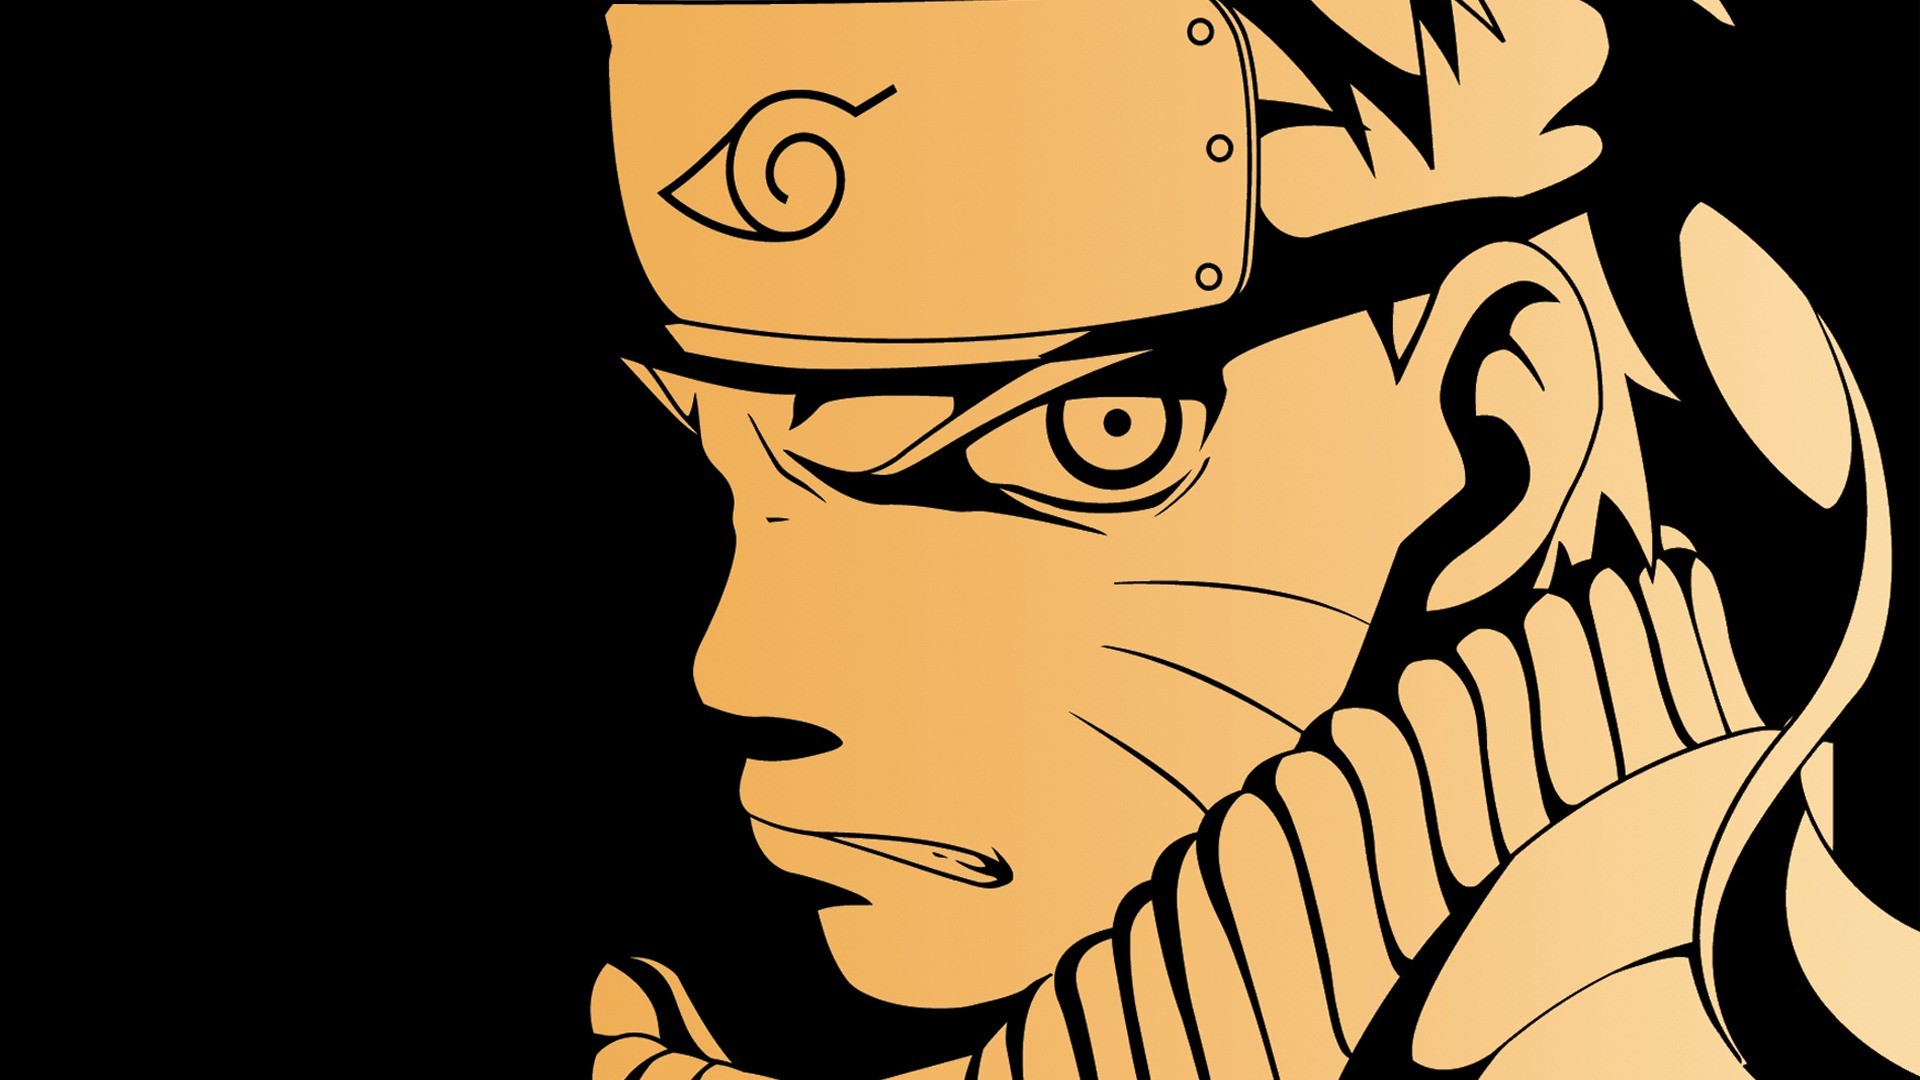 Naruto Wallpaper with high-resolution 1920x1080 pixel. You can use this poster wallpaper for your Desktop Computers, Mac Screensavers, Windows Backgrounds, iPhone Wallpapers, Tablet or Android Lock screen and another Mobile device